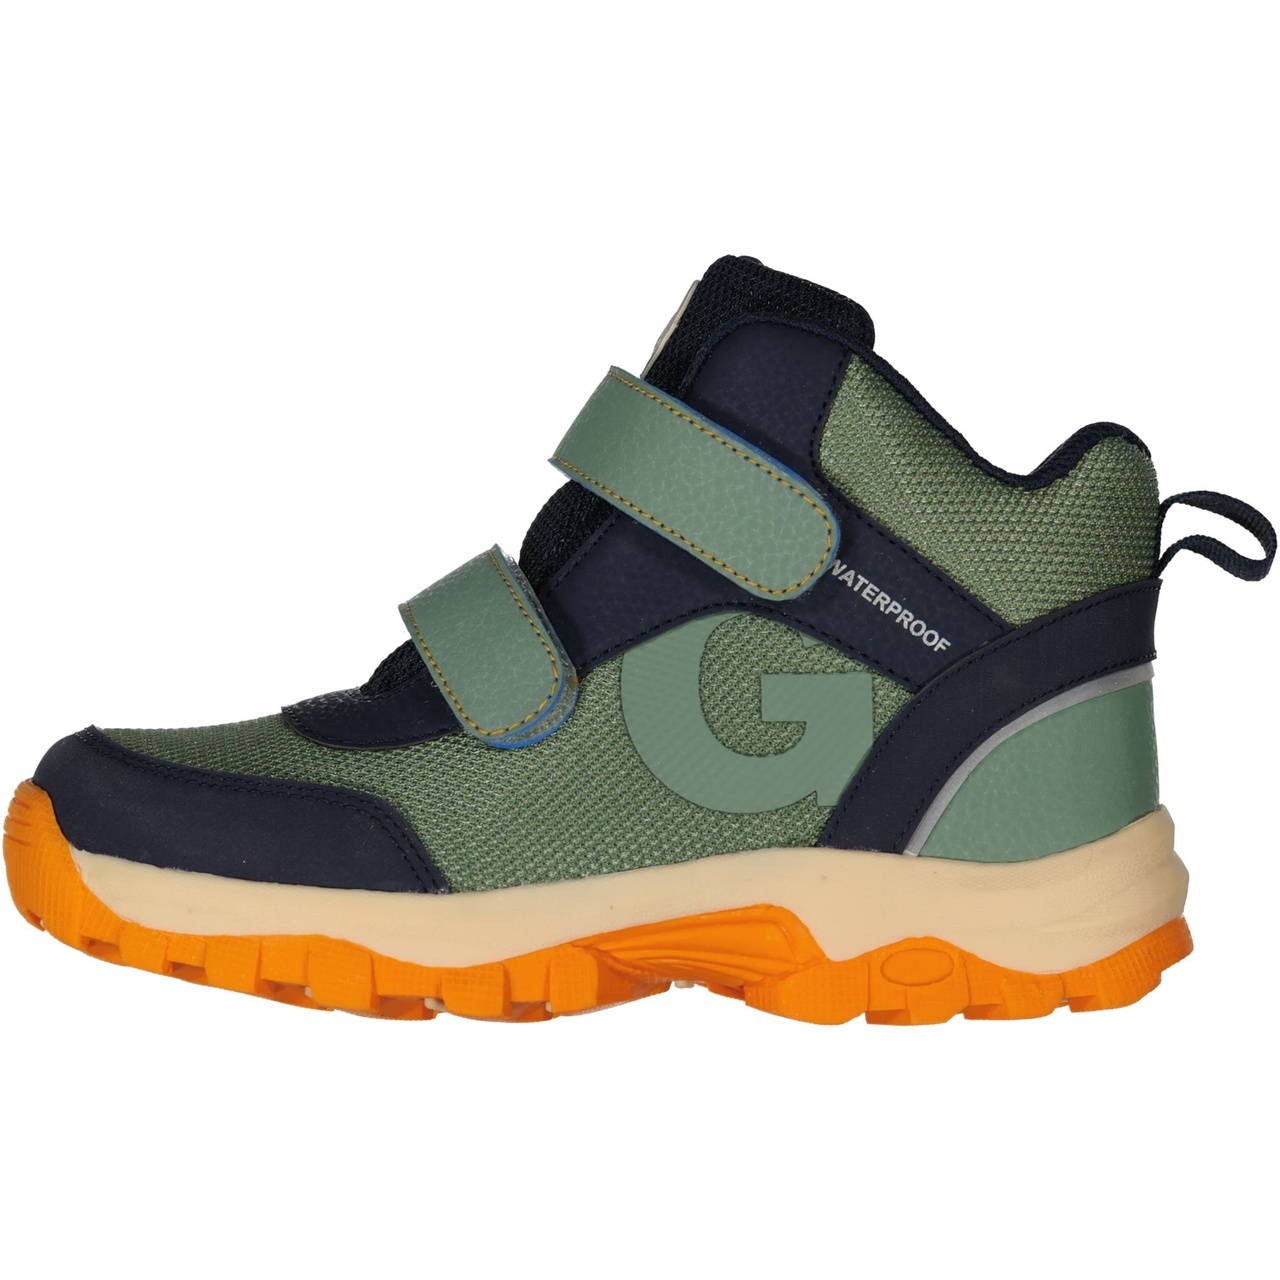 All weather shoes Moss green  24 (15,8 cm)